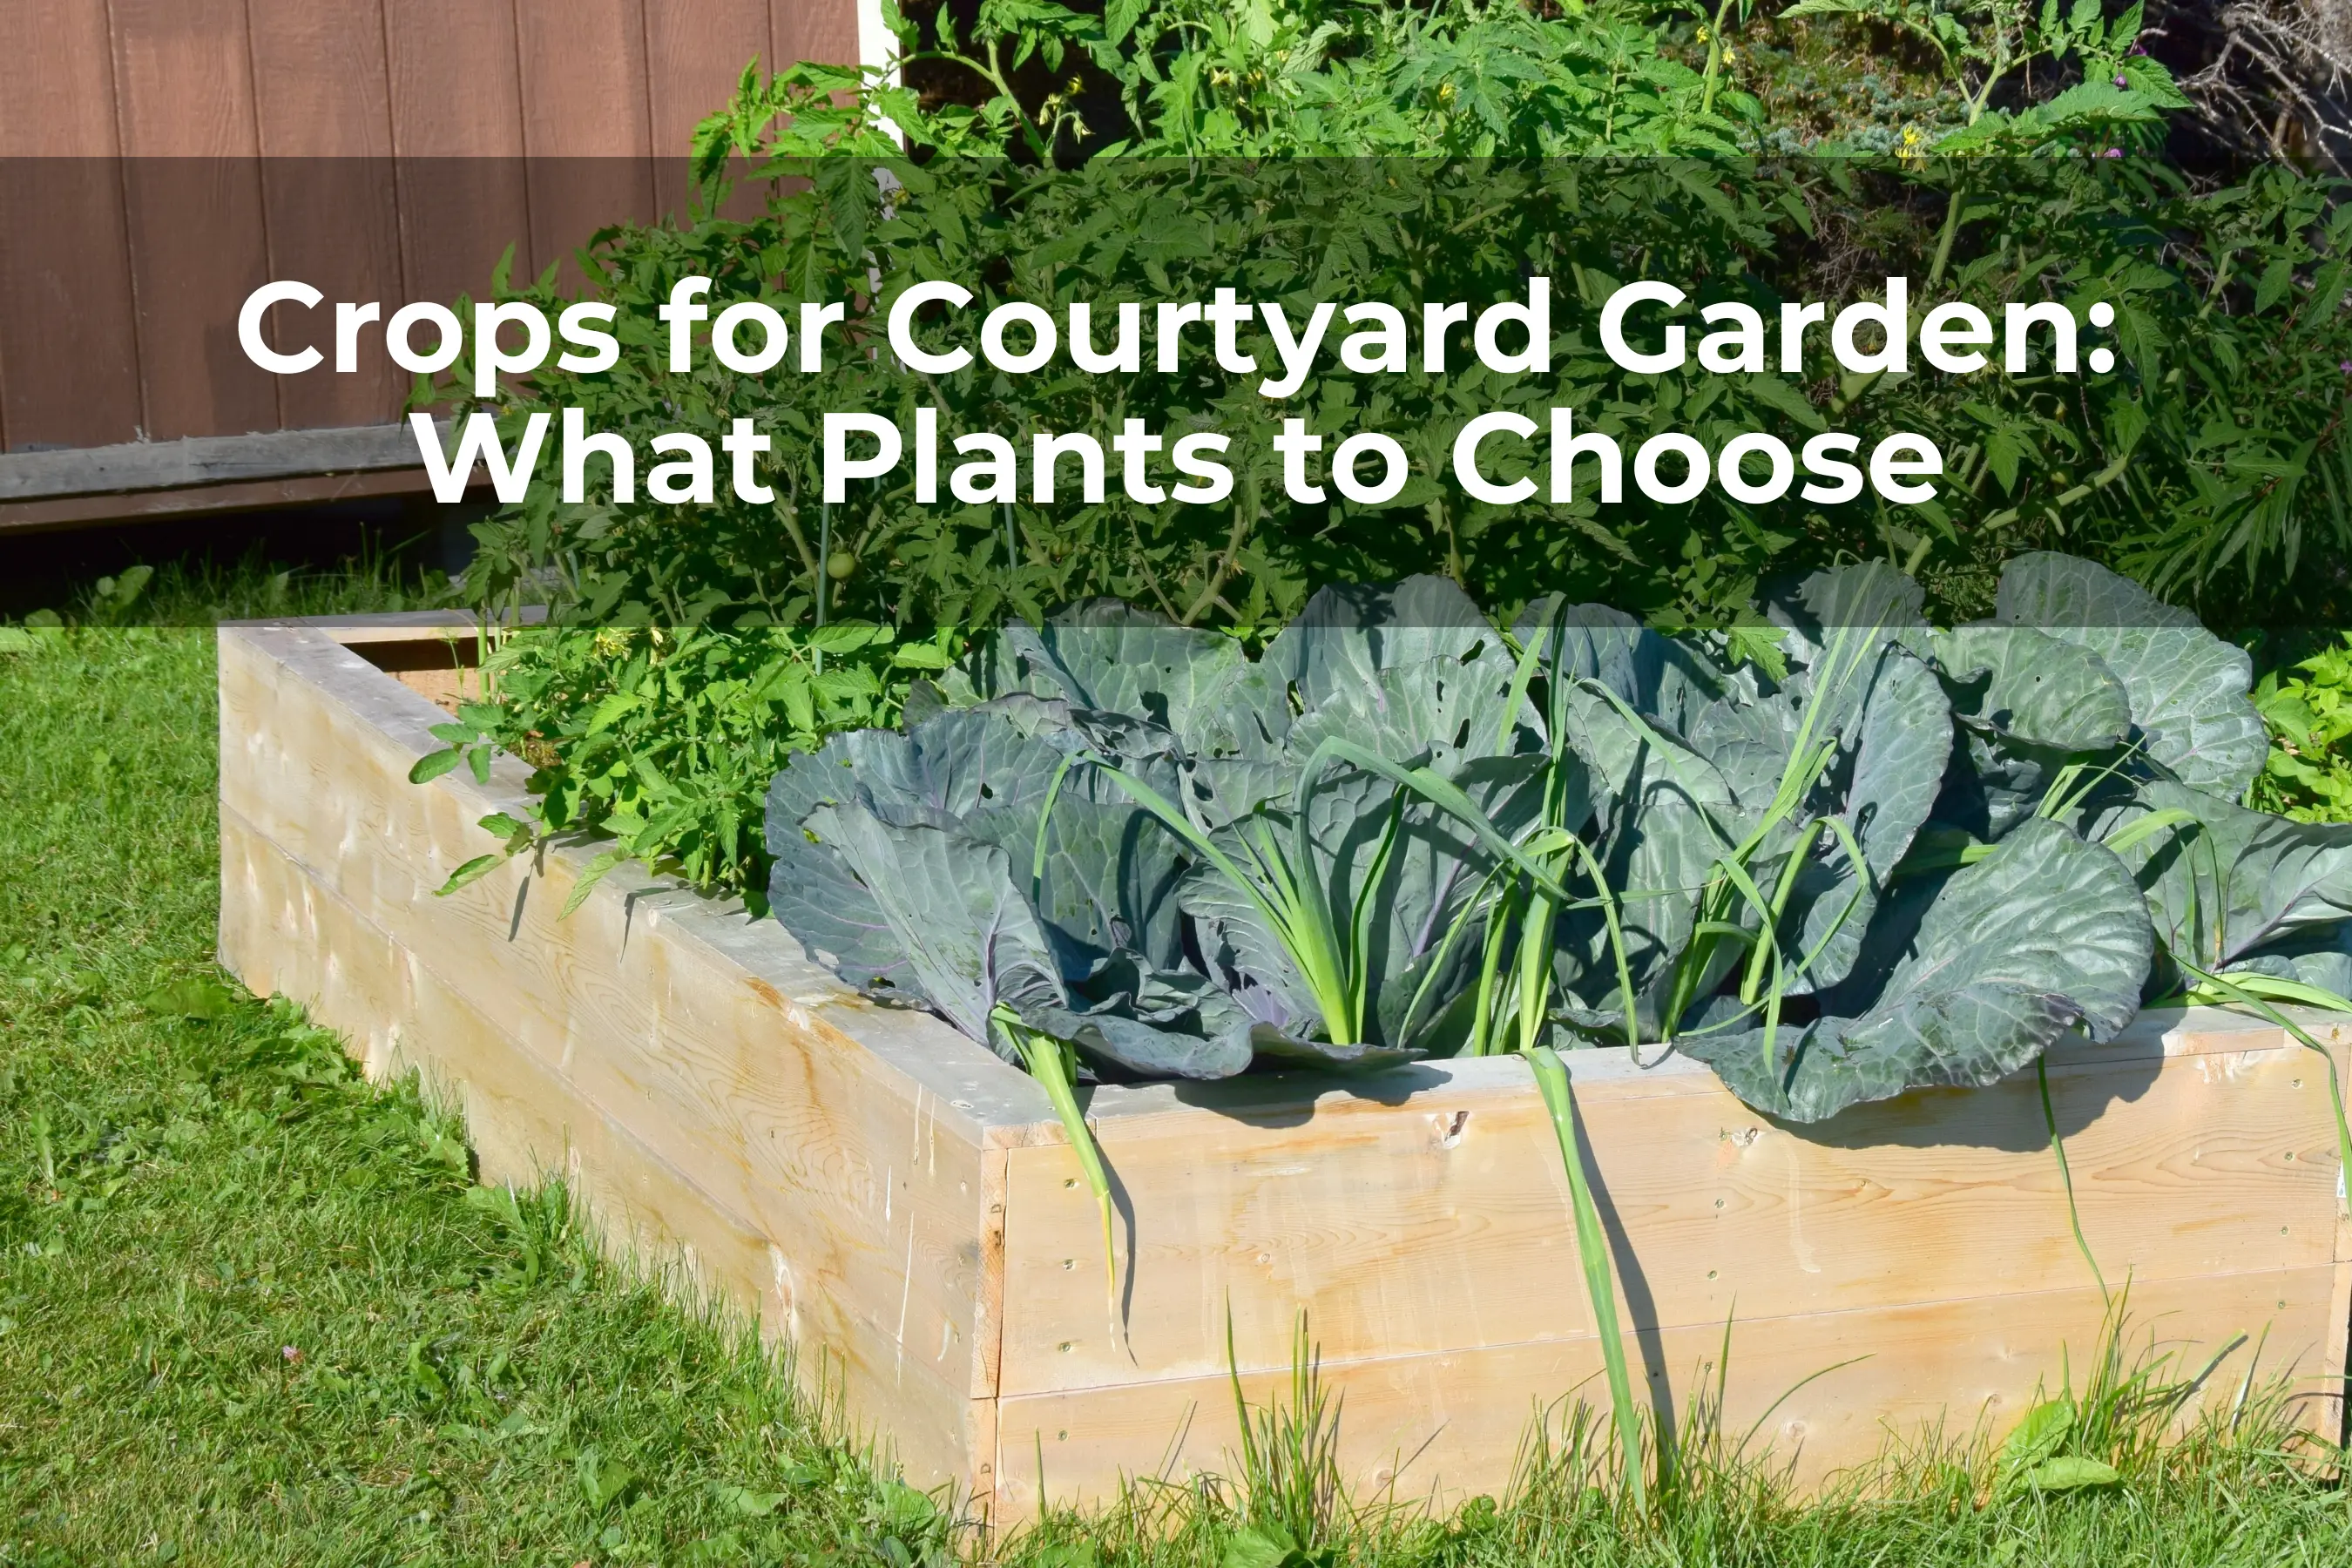 Crops for Courtyard Garden: What Plants to Choose